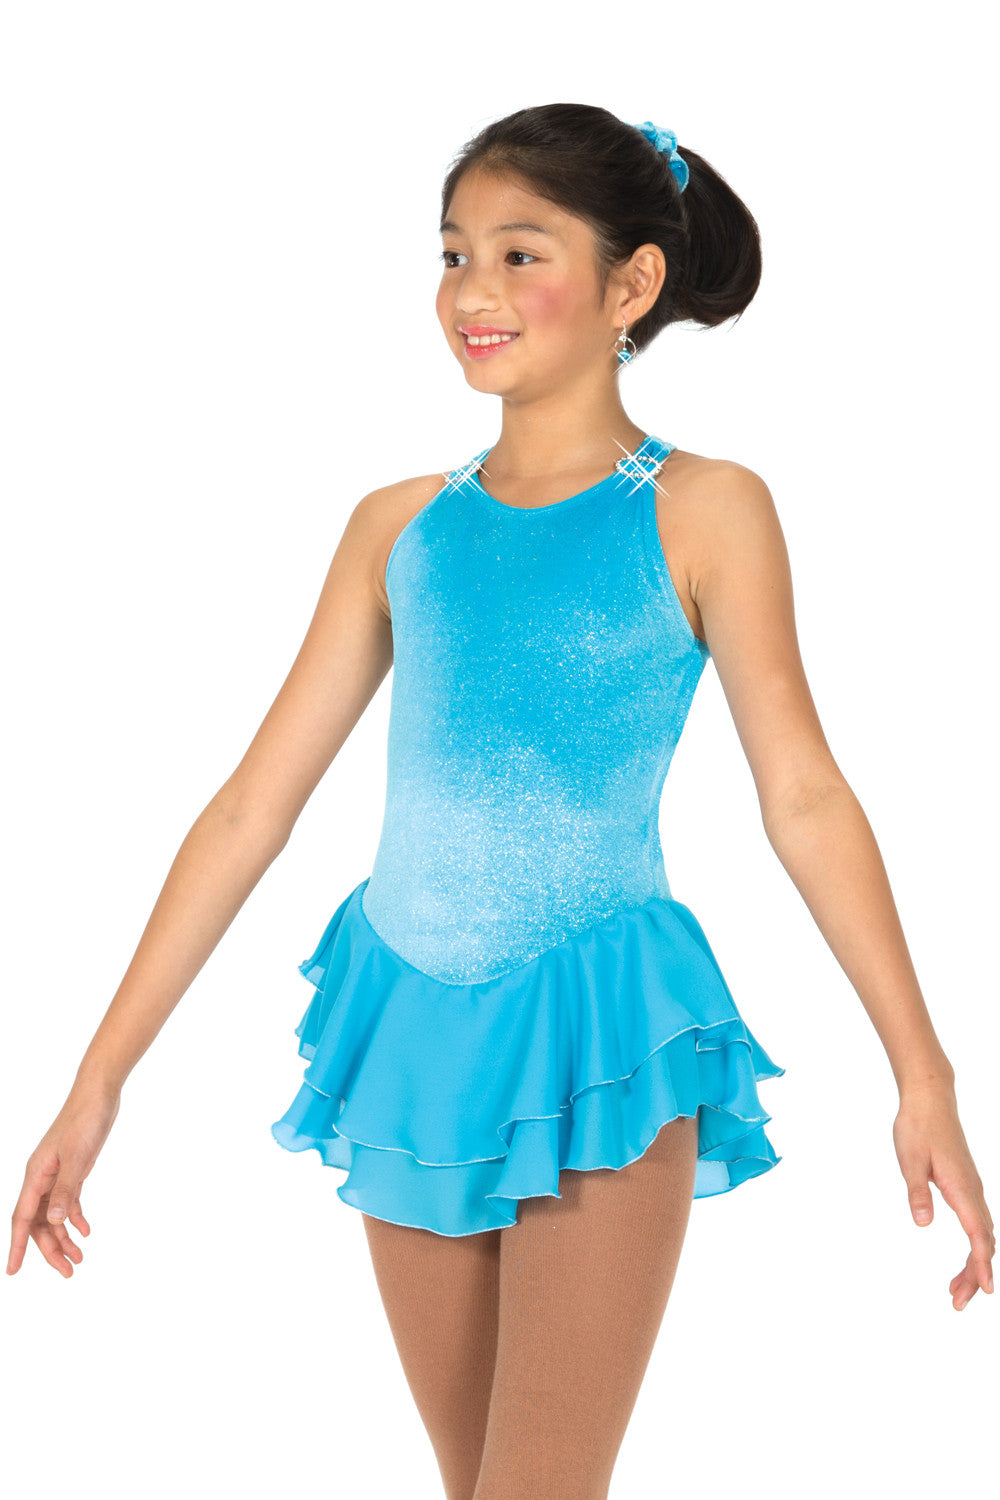 Jerry's 010 Youth 12-14 Ice Shimmer Skate Dress - MISS LESTER'S 